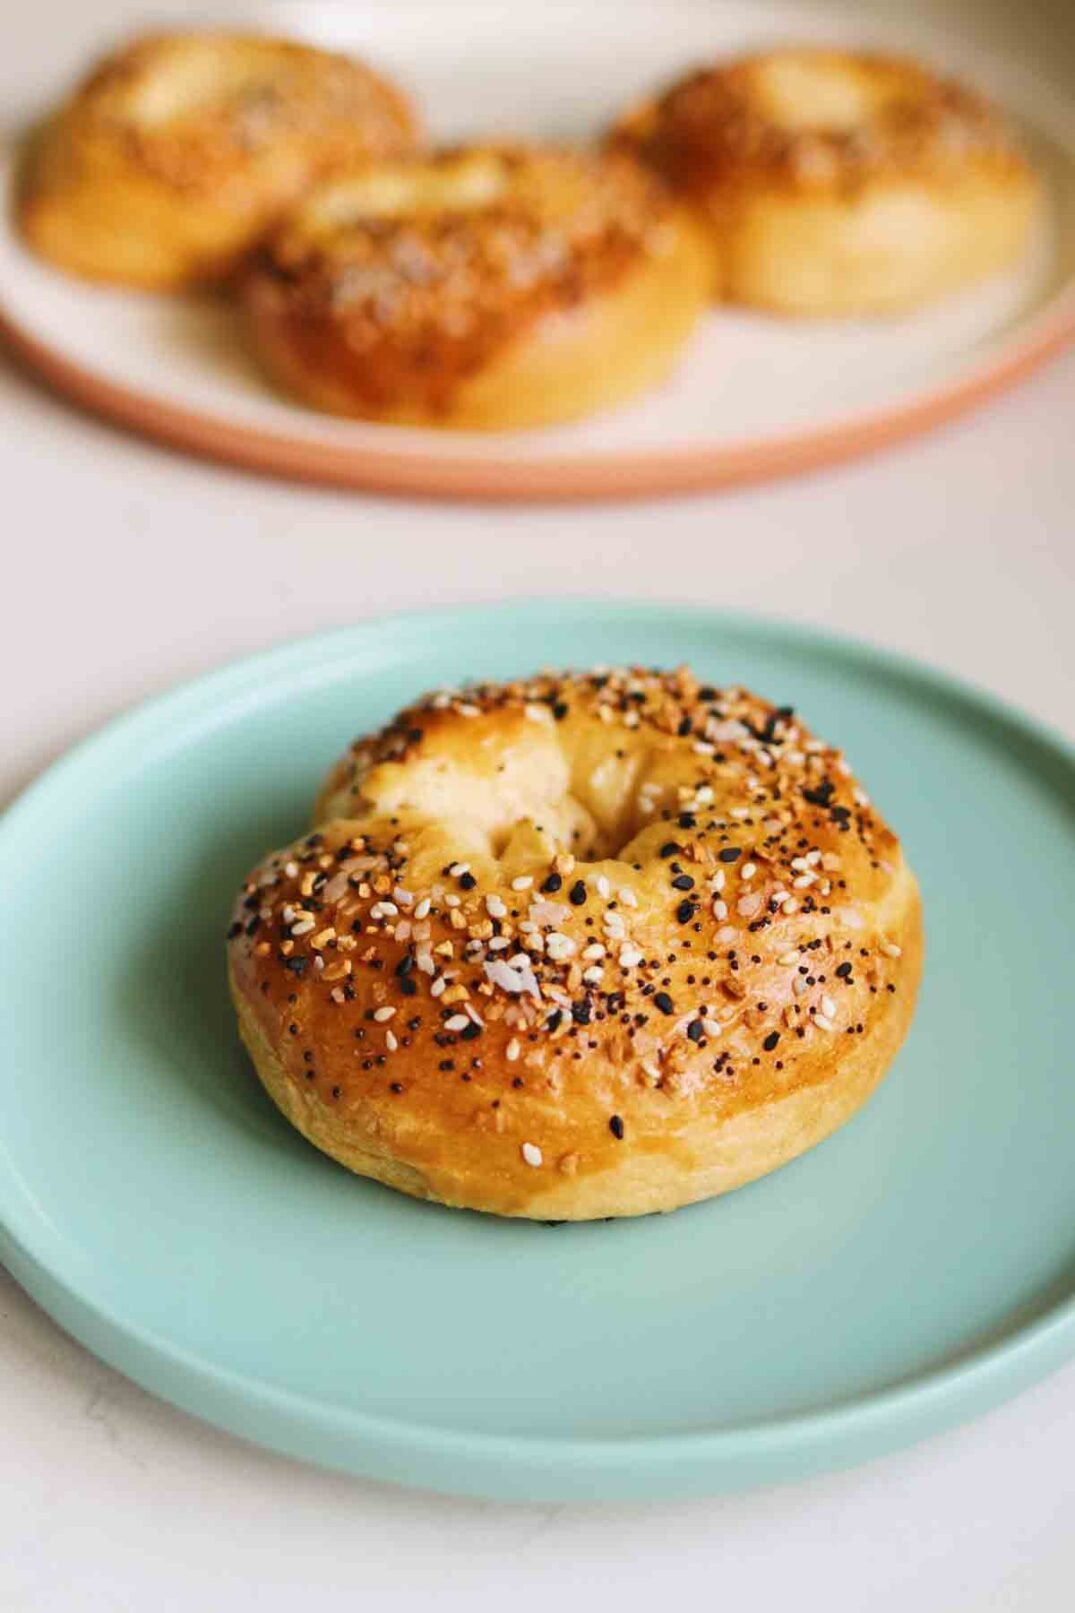 a single stuffed bagel sitting on a blue plate with other stuffed bagels in the background